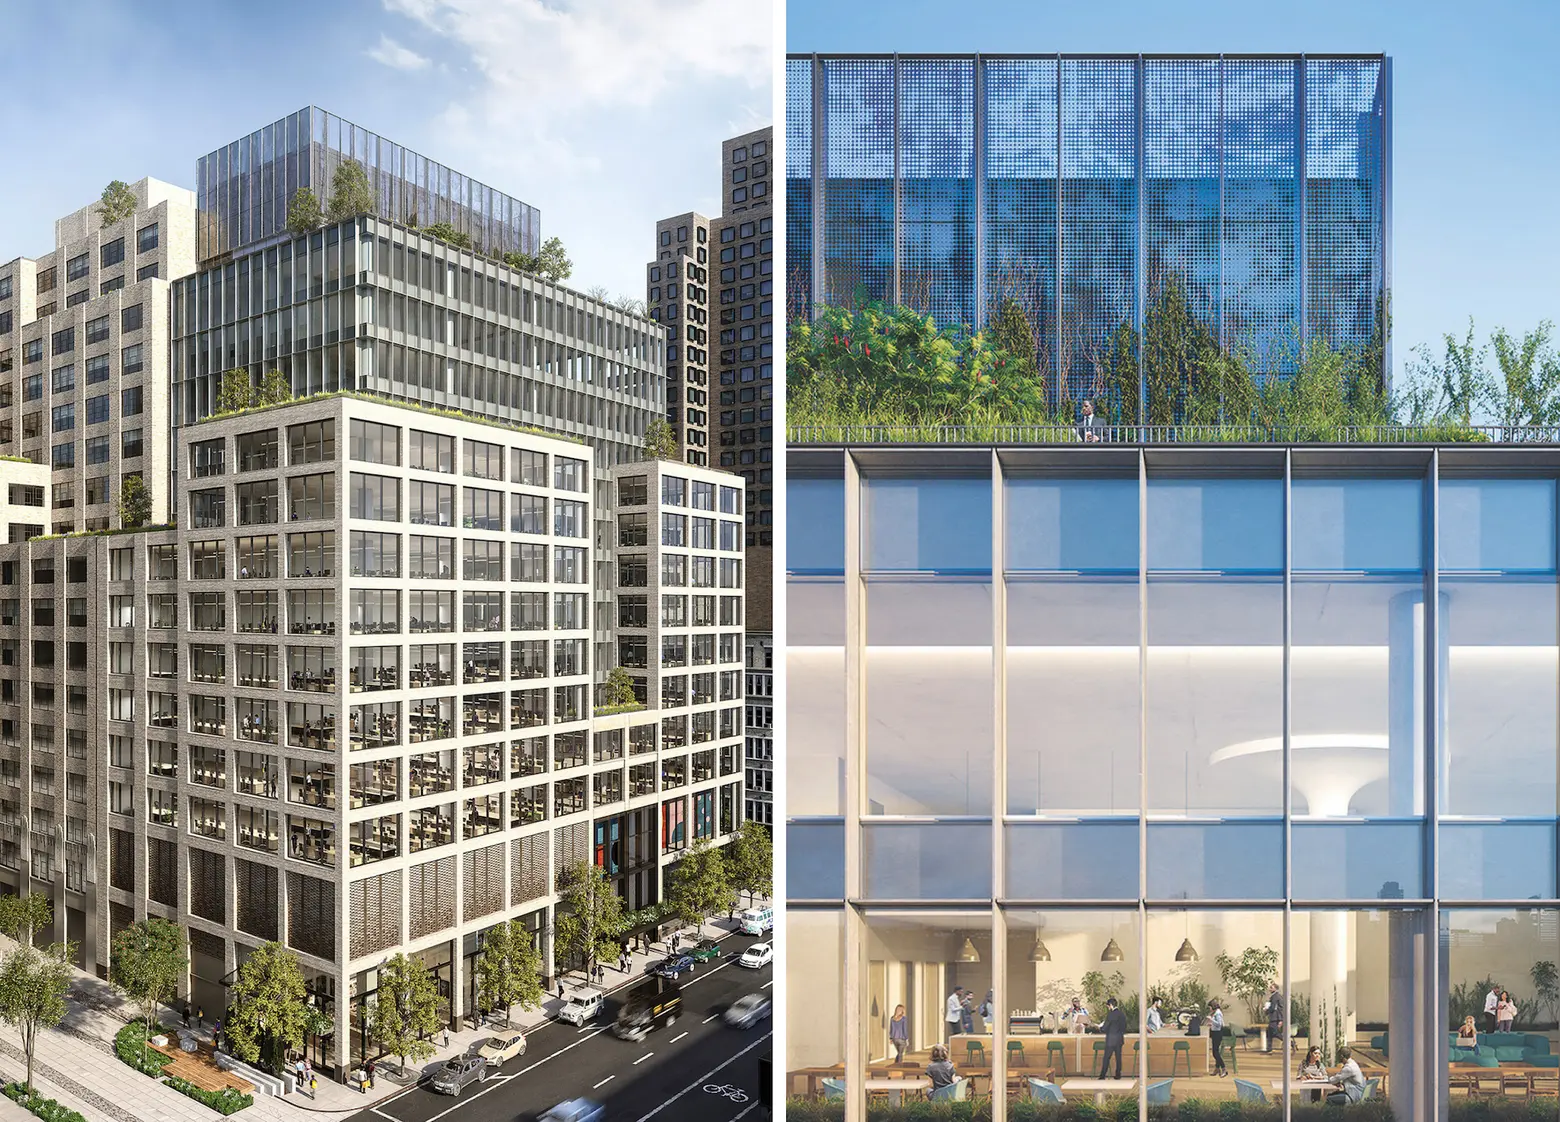 16-story sustainable office tower 555 Greenwich breaks ground in Hudson Square